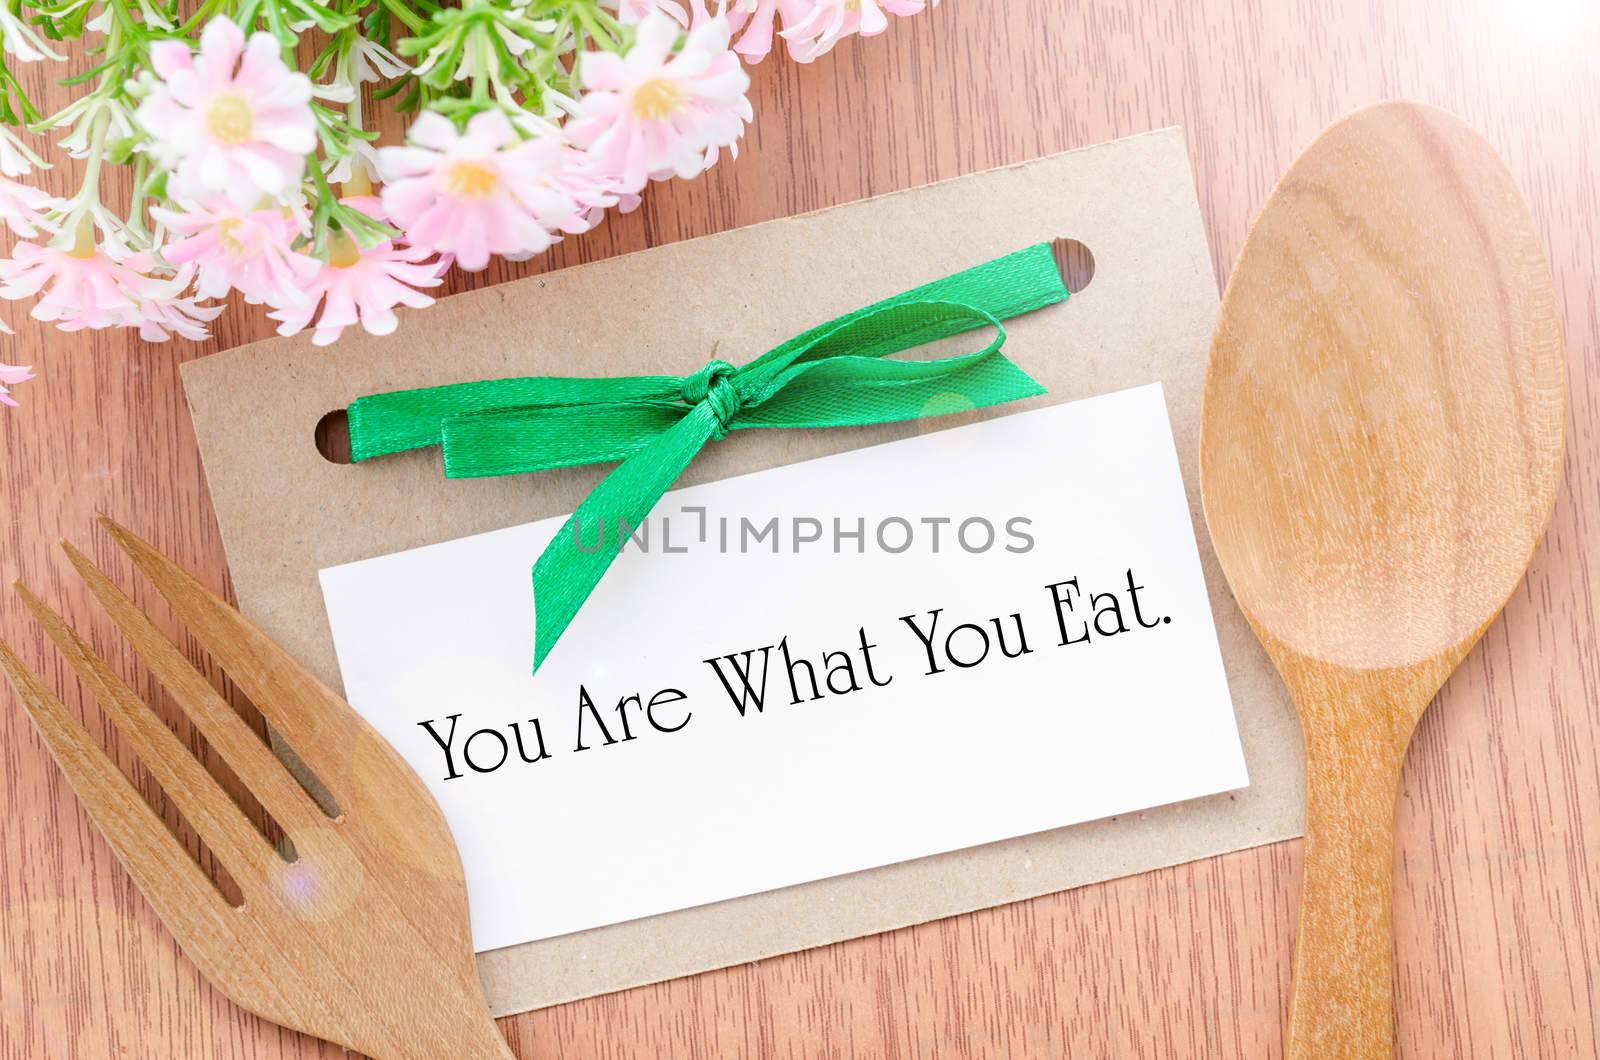 You are what you eat message in paper tag with wooden spoon on wooden background. Healthy concept.